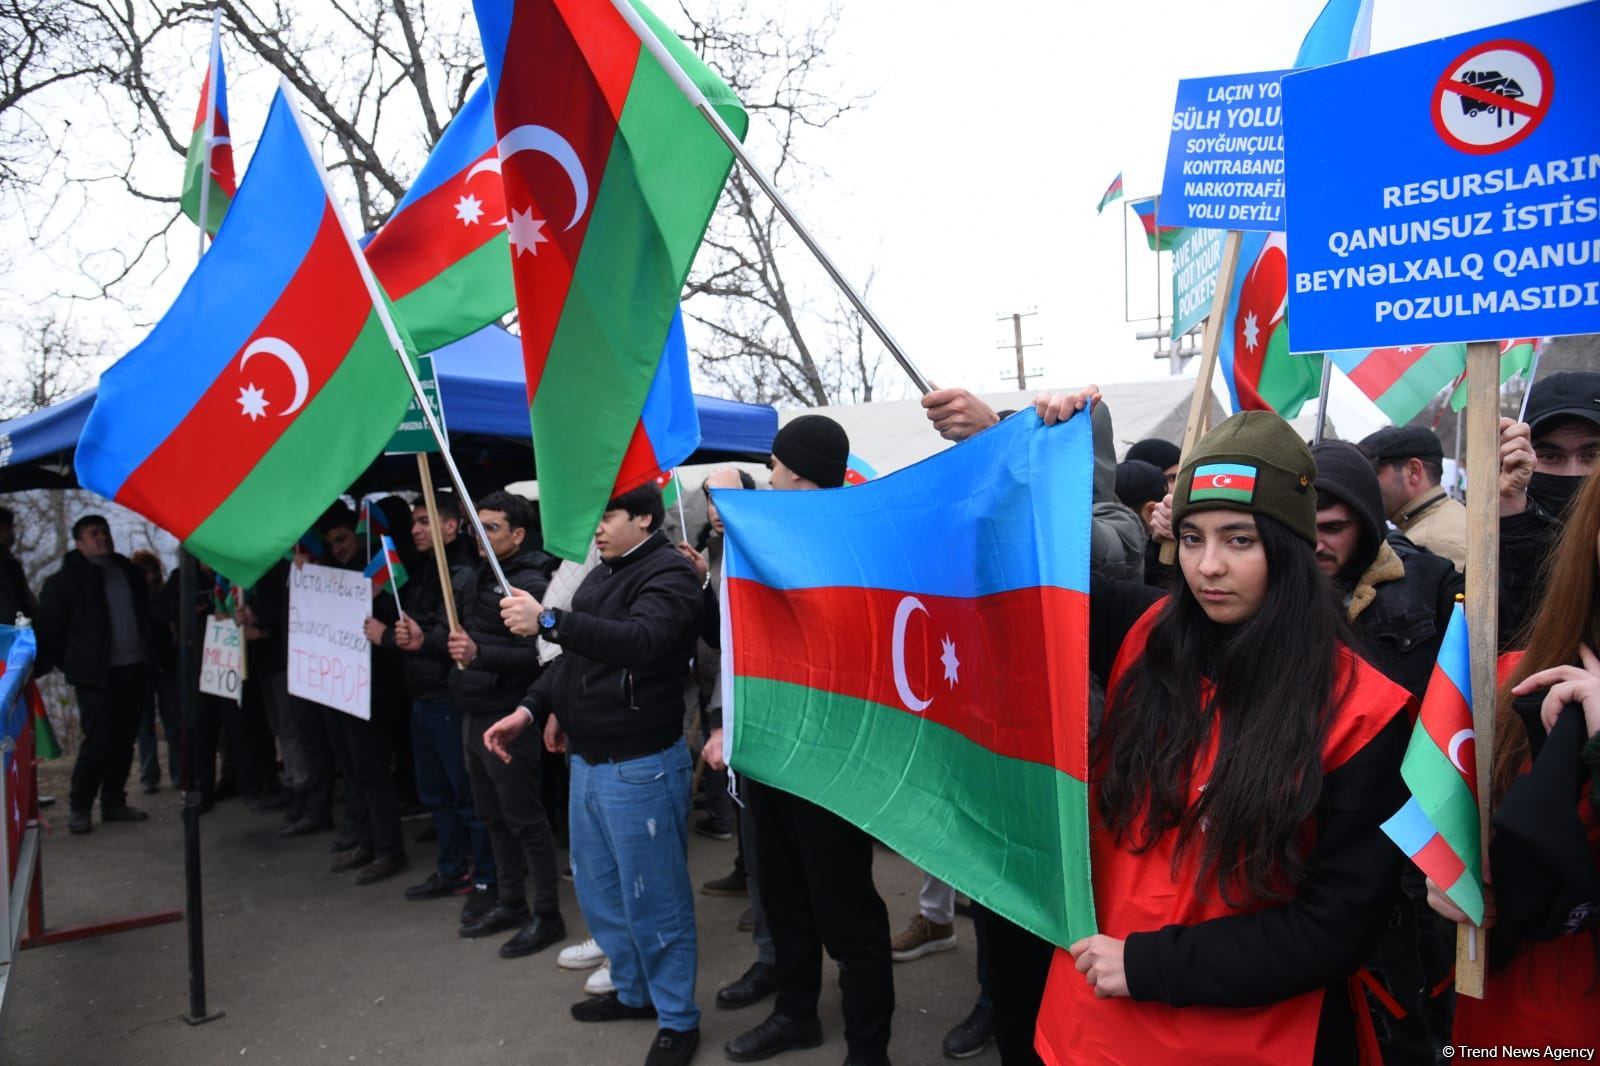 Azerbaijani peaceful protesters release statement: UN Security Council - hostage of double standards